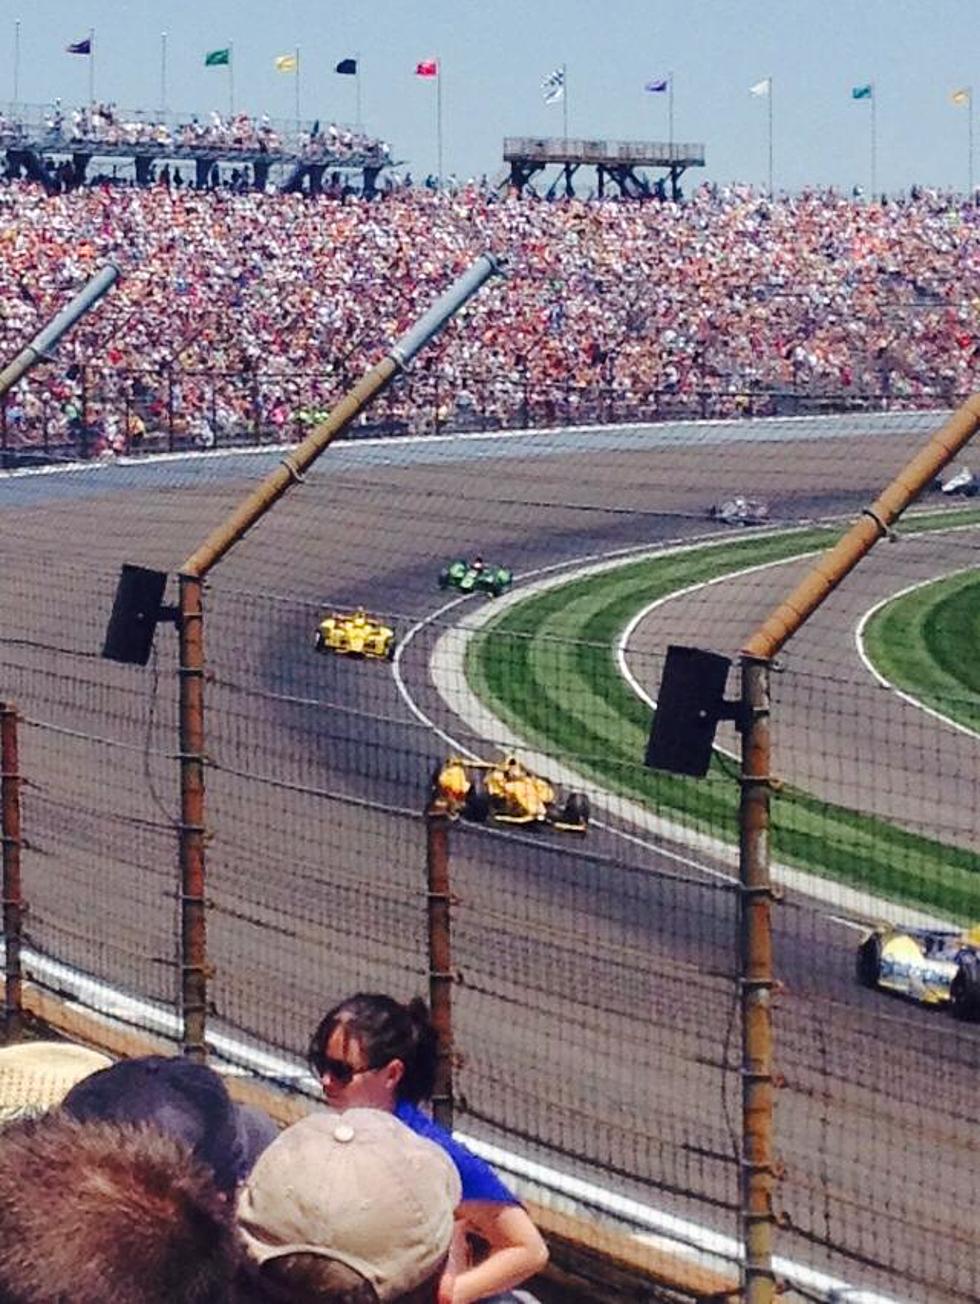 Record Breaking Attendance Expected At This Years Indy 500